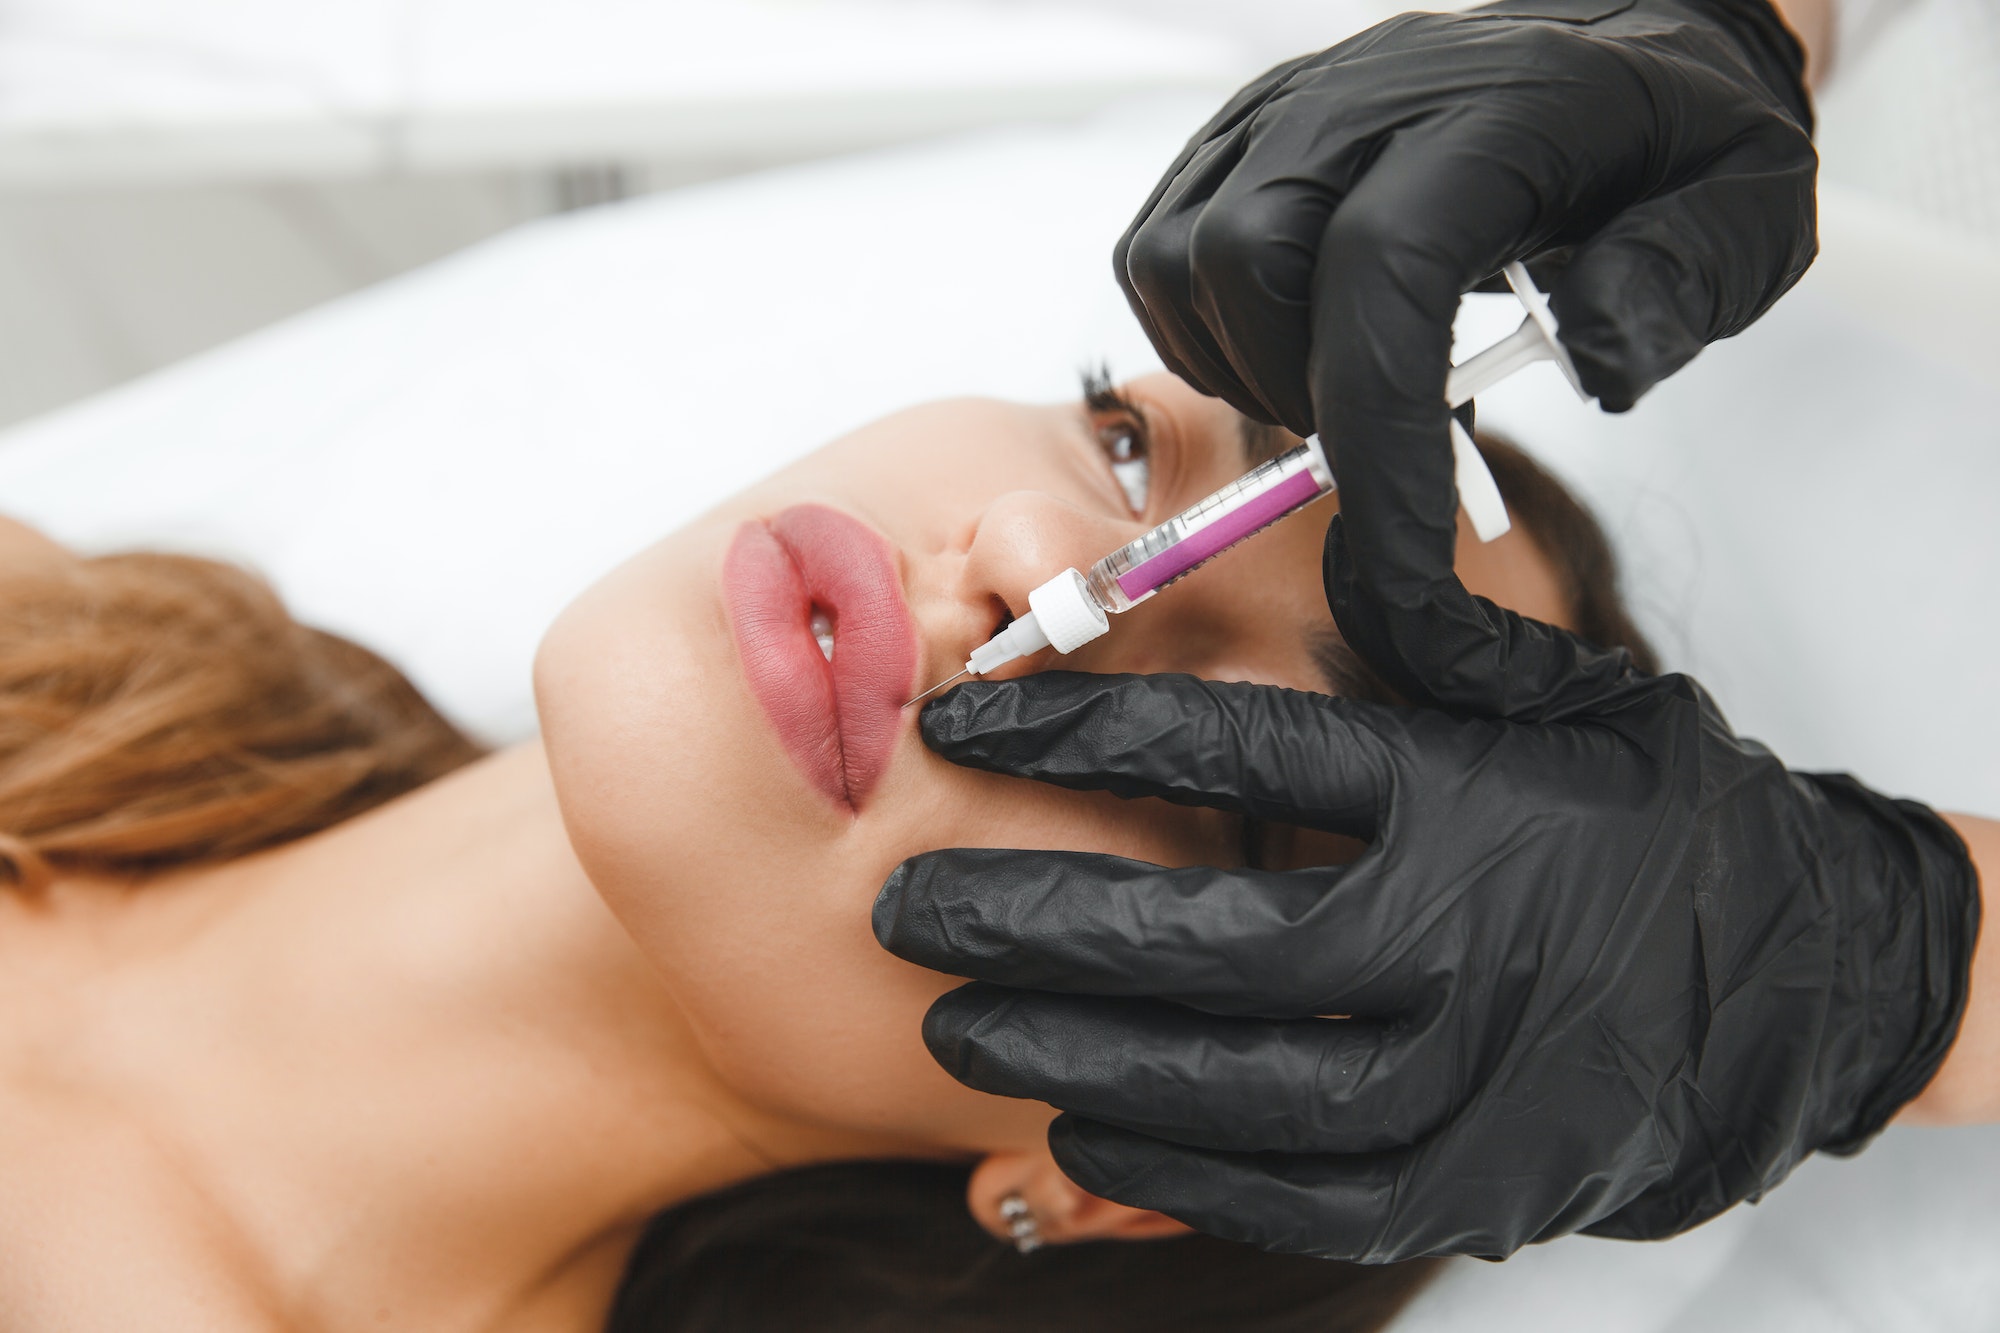 female lips, lip augmentation procedure. A syringe near a woman's mouth, injections to increase